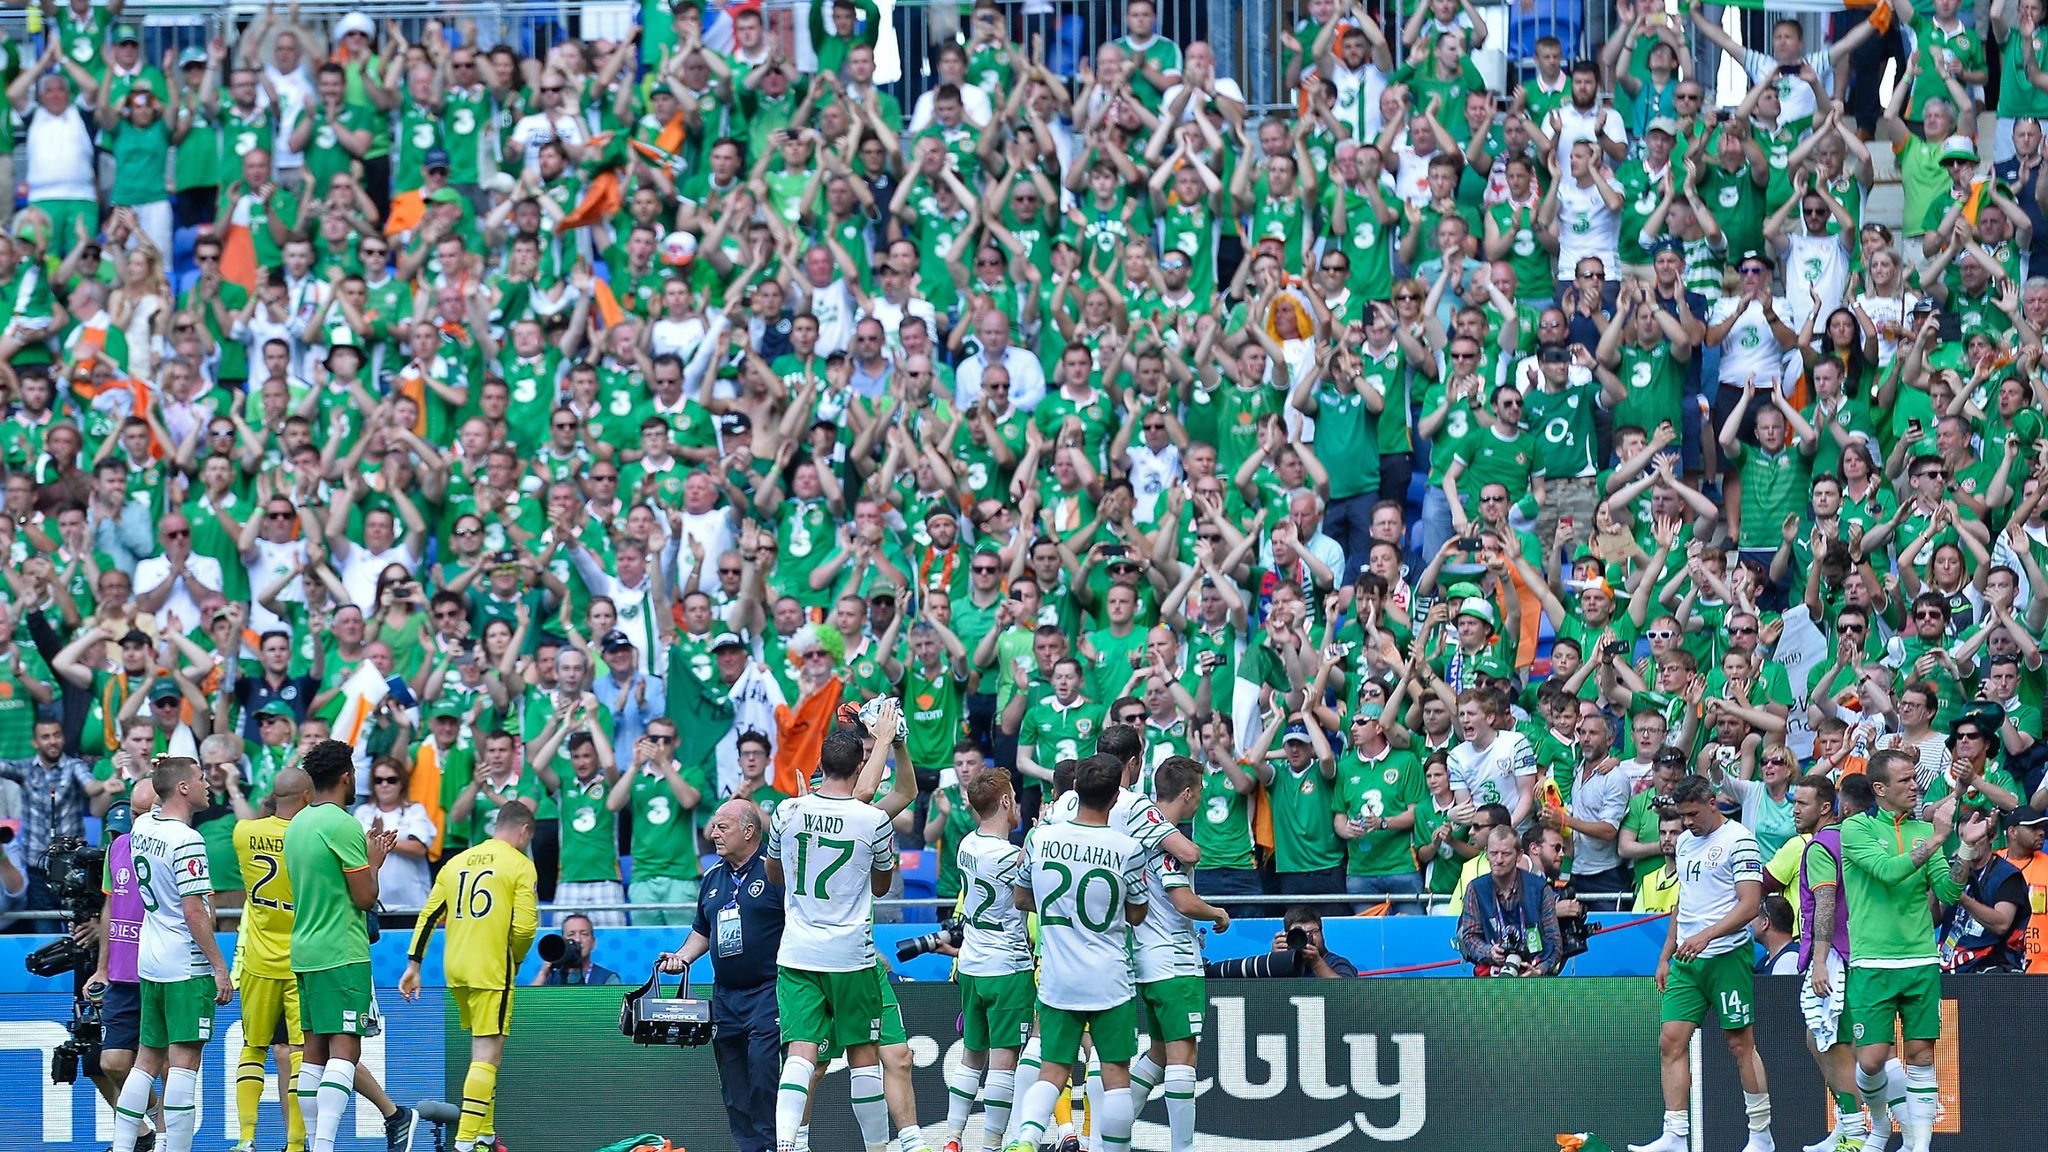 Republic of Ireland fans awarded Medal of City of Paris